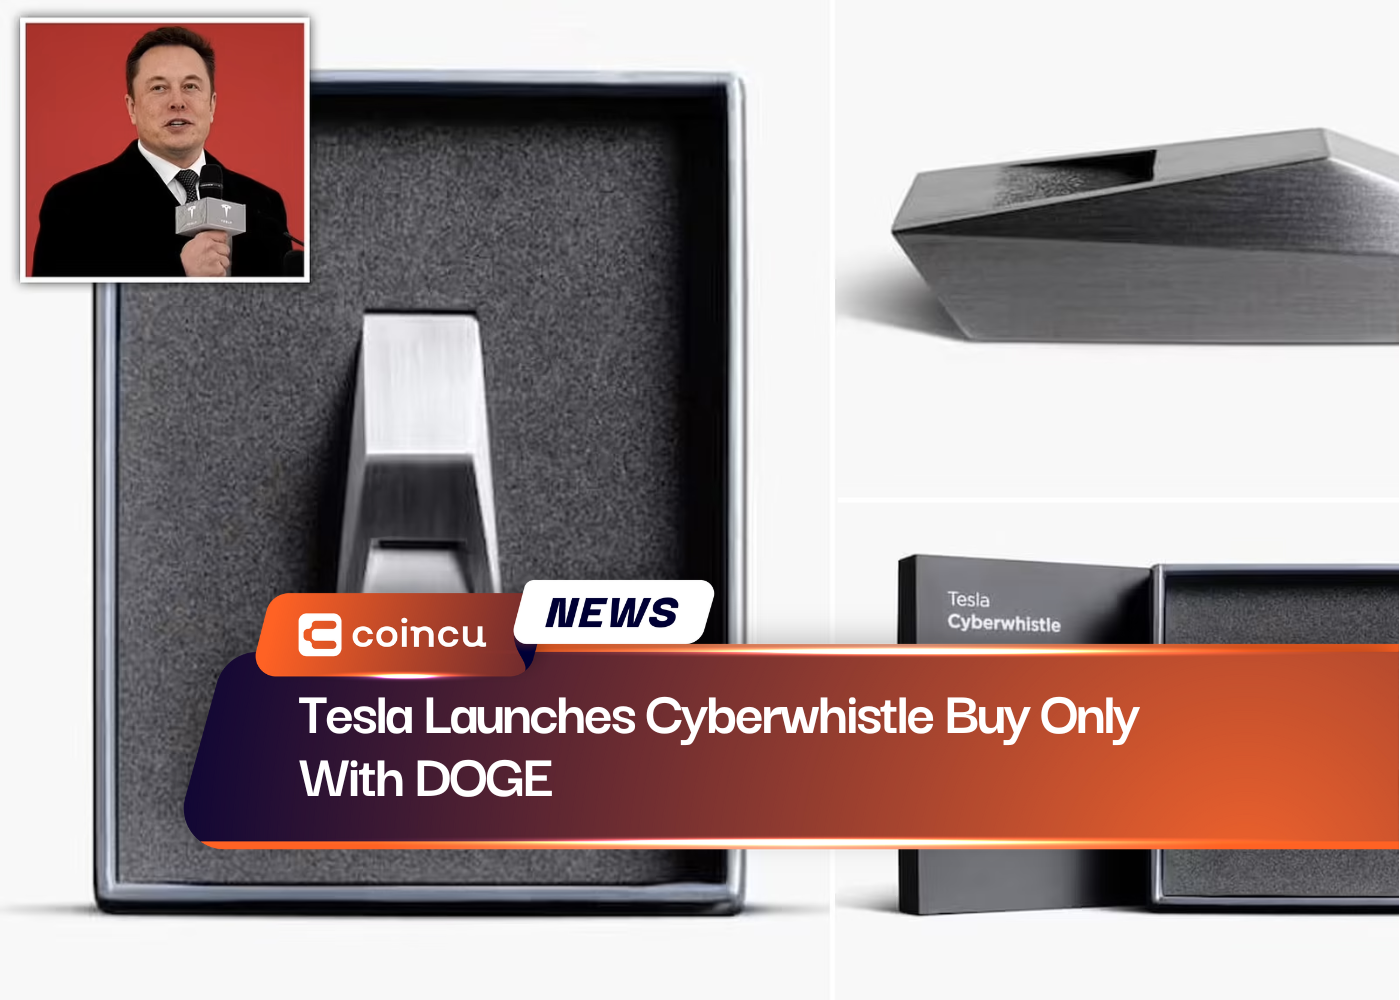 Tesla Launches Cyberwhistle Buy Only With DOGE